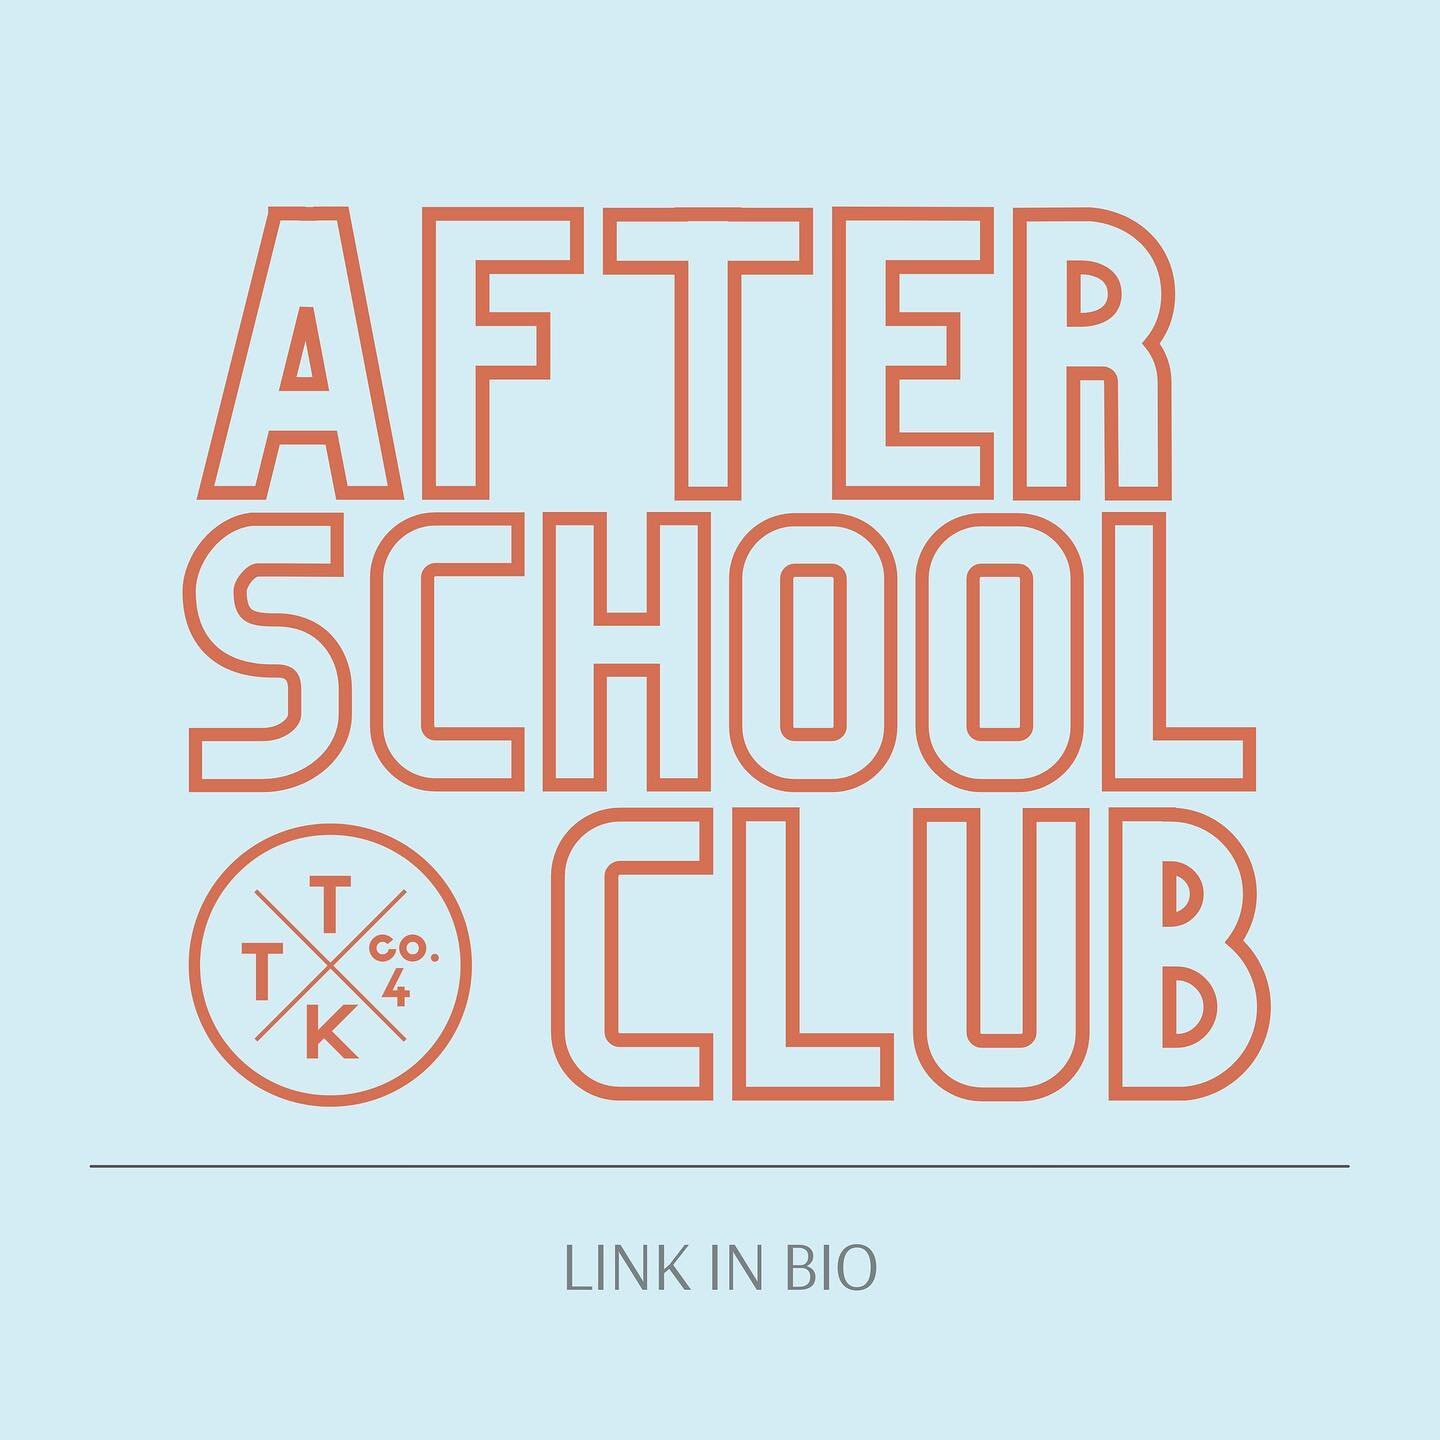 Introducing After School Club! Daily after school care and programming starting September 13. 🎭 ⚽️ 🎨 🎶 Details at link in bio. Email to register!